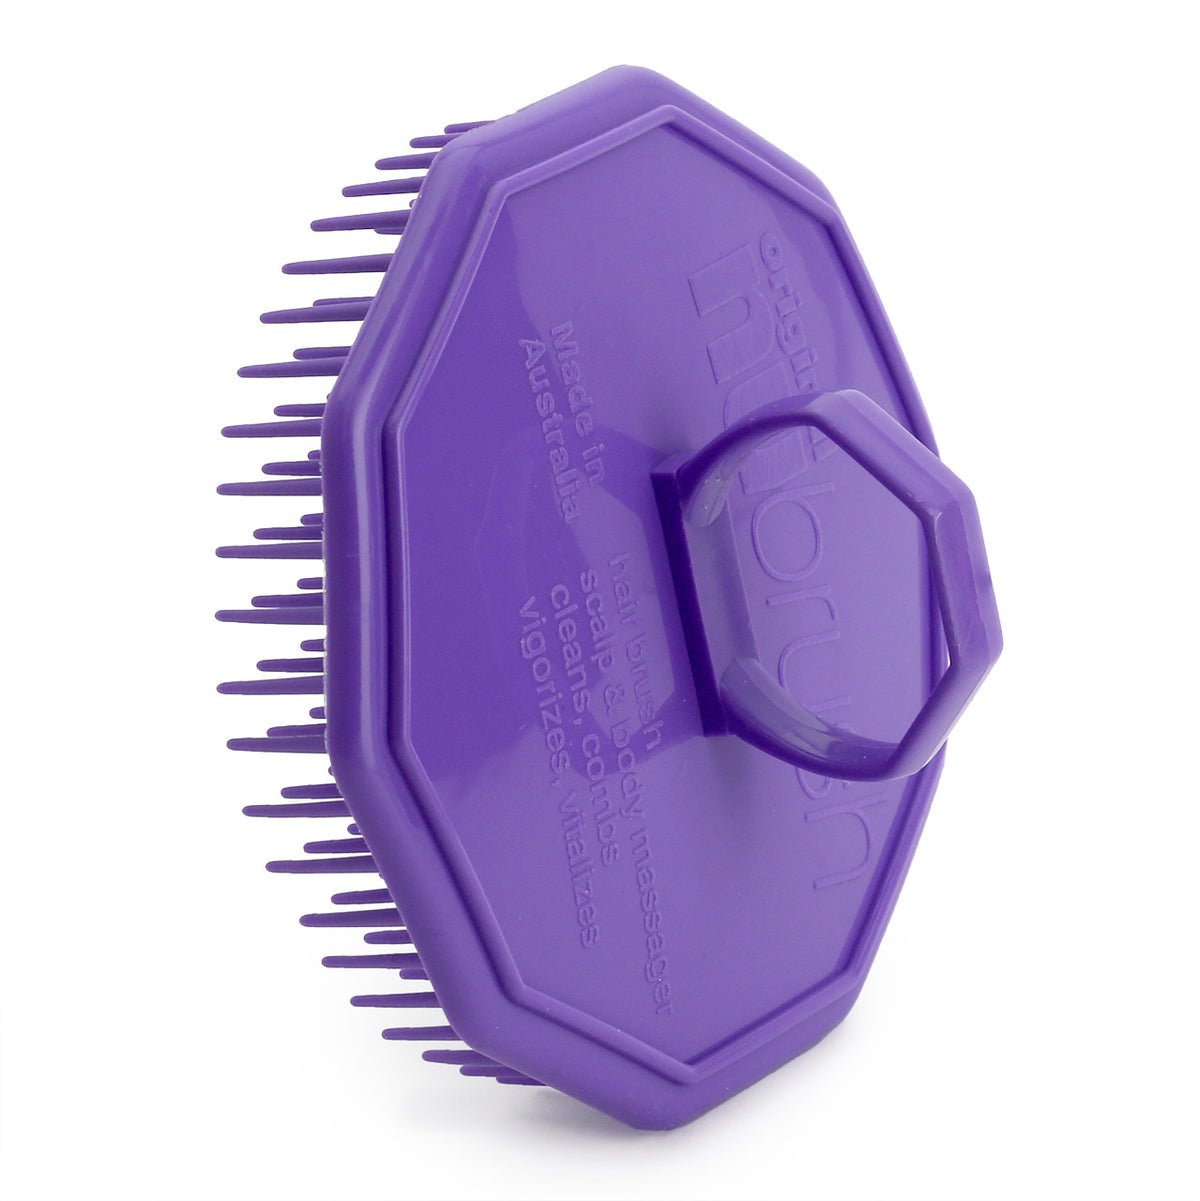 Purple NuBrush showing the finger hole on the top and the bristles underneath